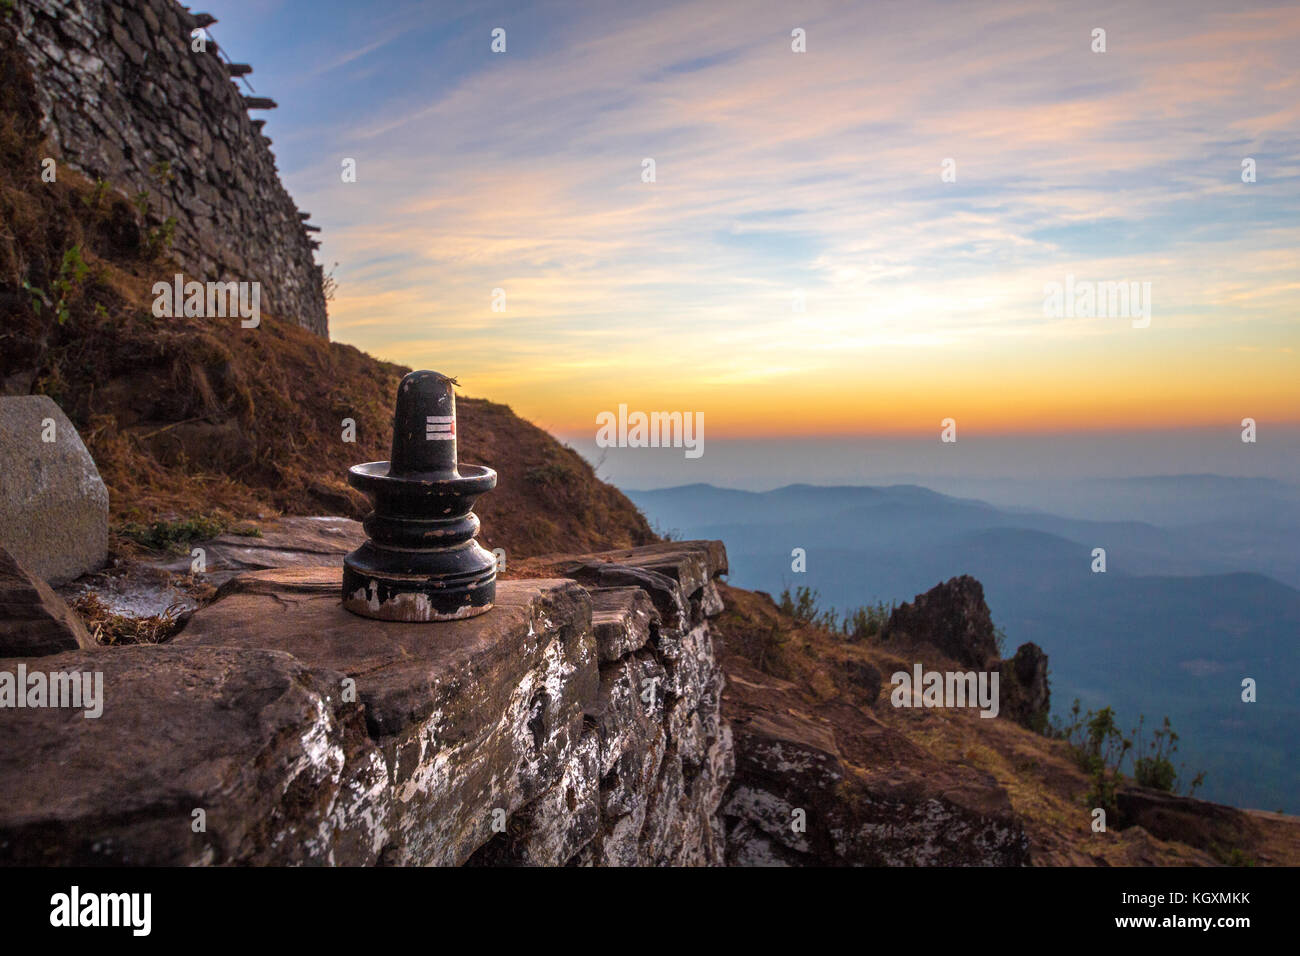 Shiva Linga High Resolution Stock Photography And Images Alamy Free shivling wallpapers and shivling backgrounds for your computer desktop. https www alamy com stock image shiva linga seen during sunrise on top of mullayanagiripeak the highest 165314791 html